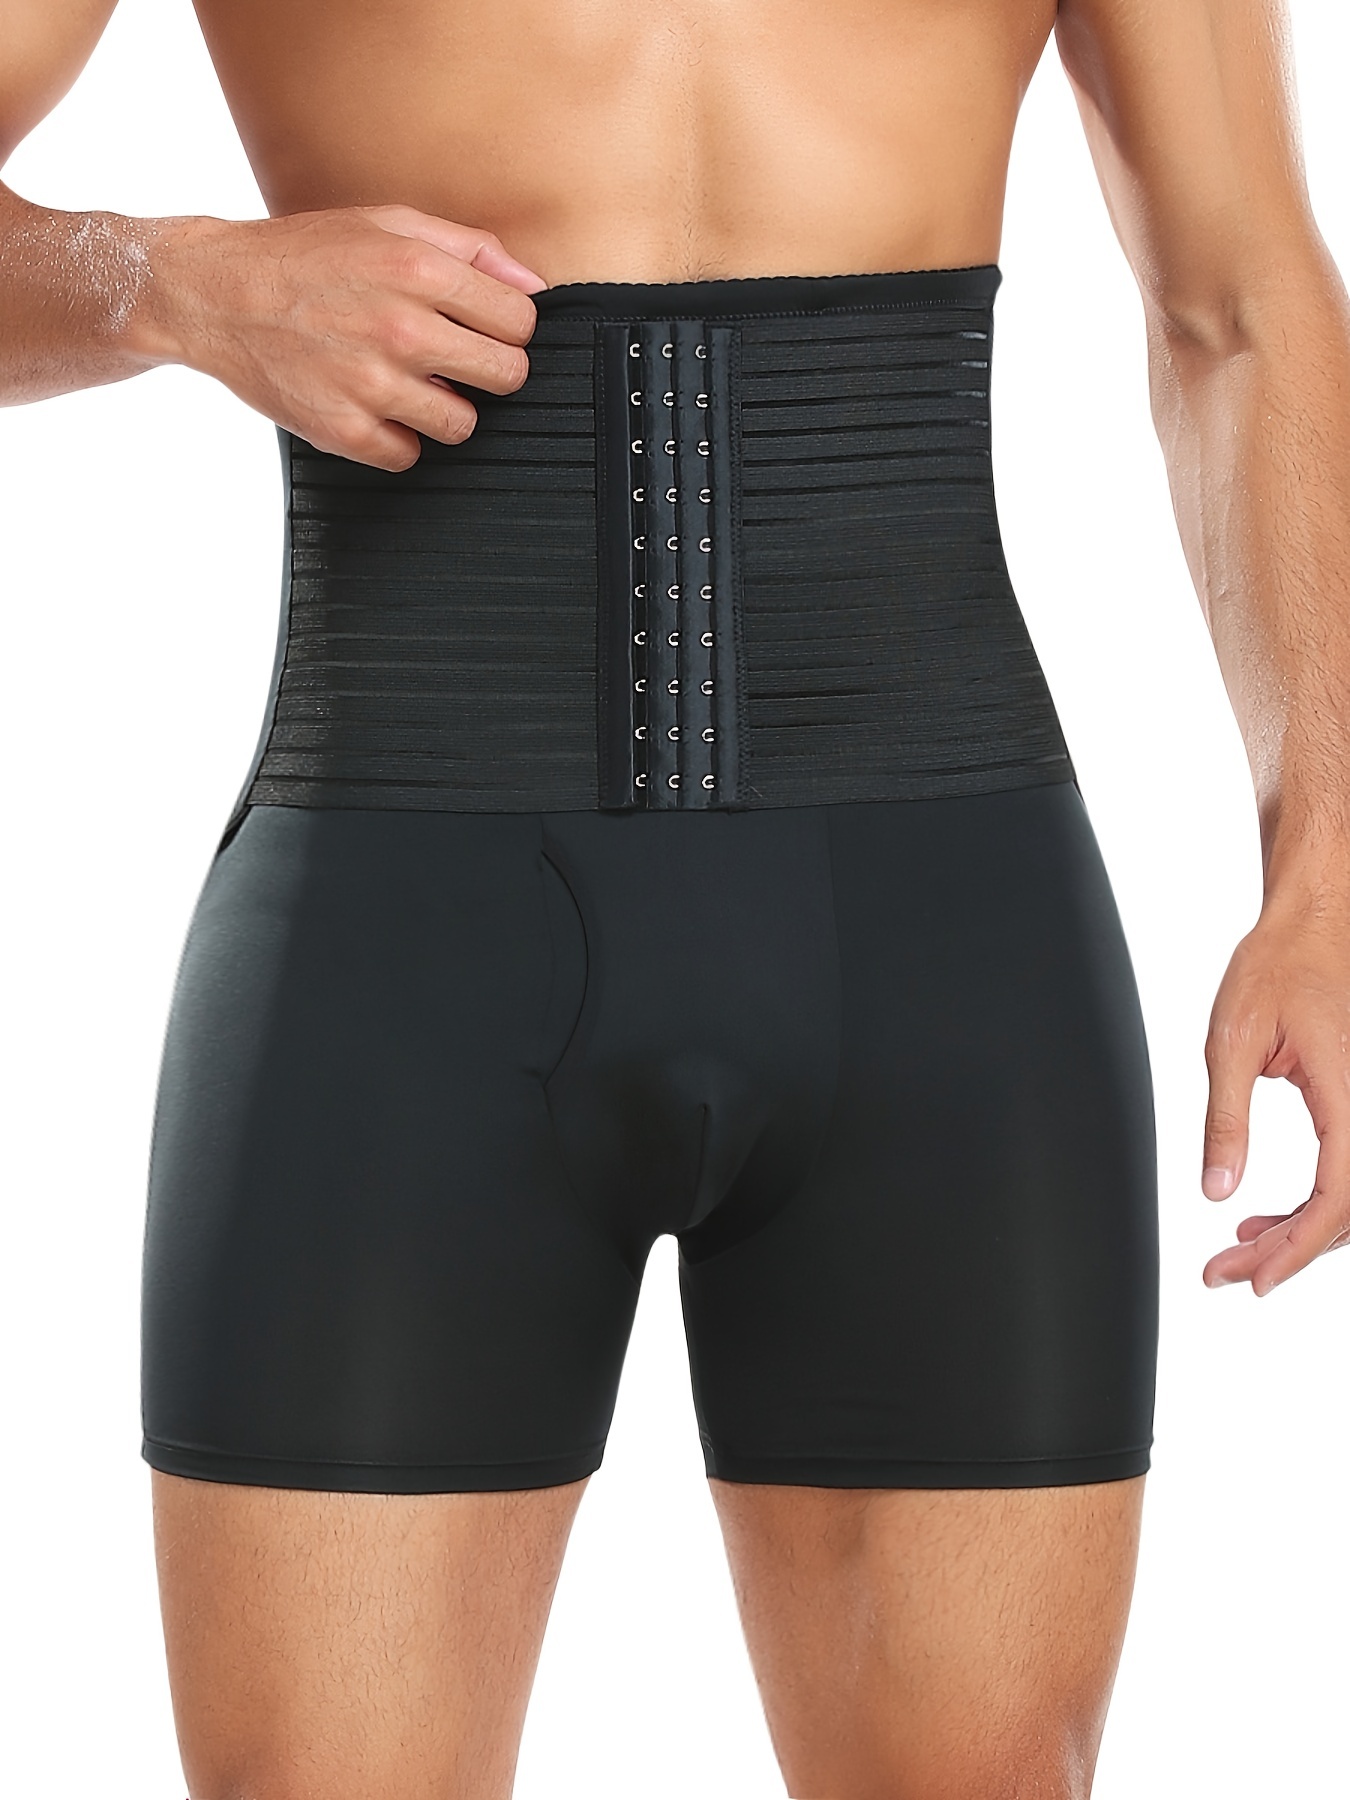 Scarboro Men's High Waist Butt Lifter Tummy Control Slimming